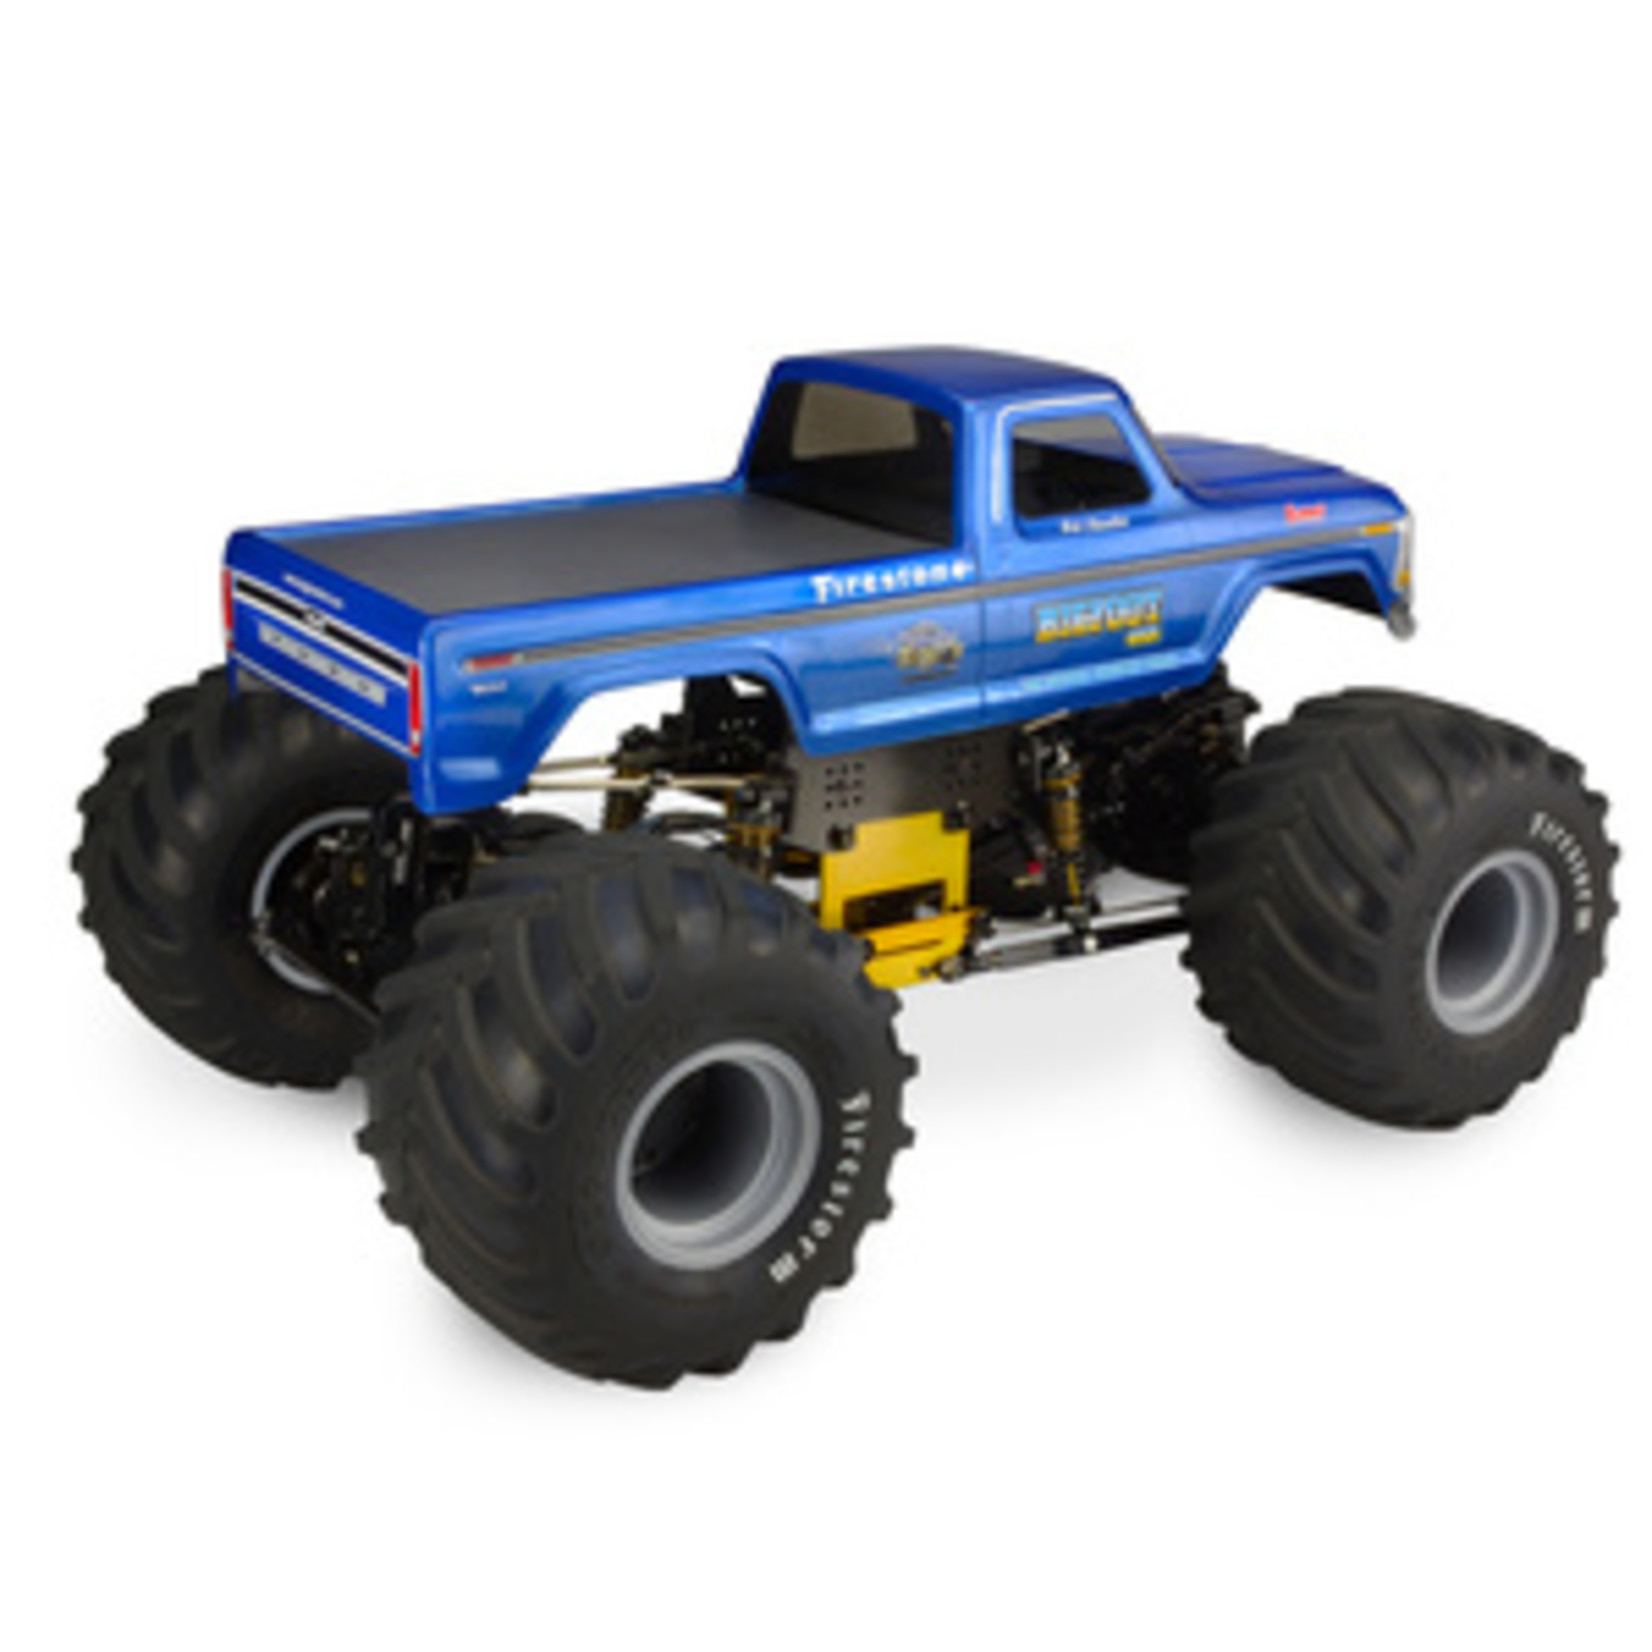 J Concepts JCO0305 1979 Ford F-250 Monster Truck Body w/ Bumpers